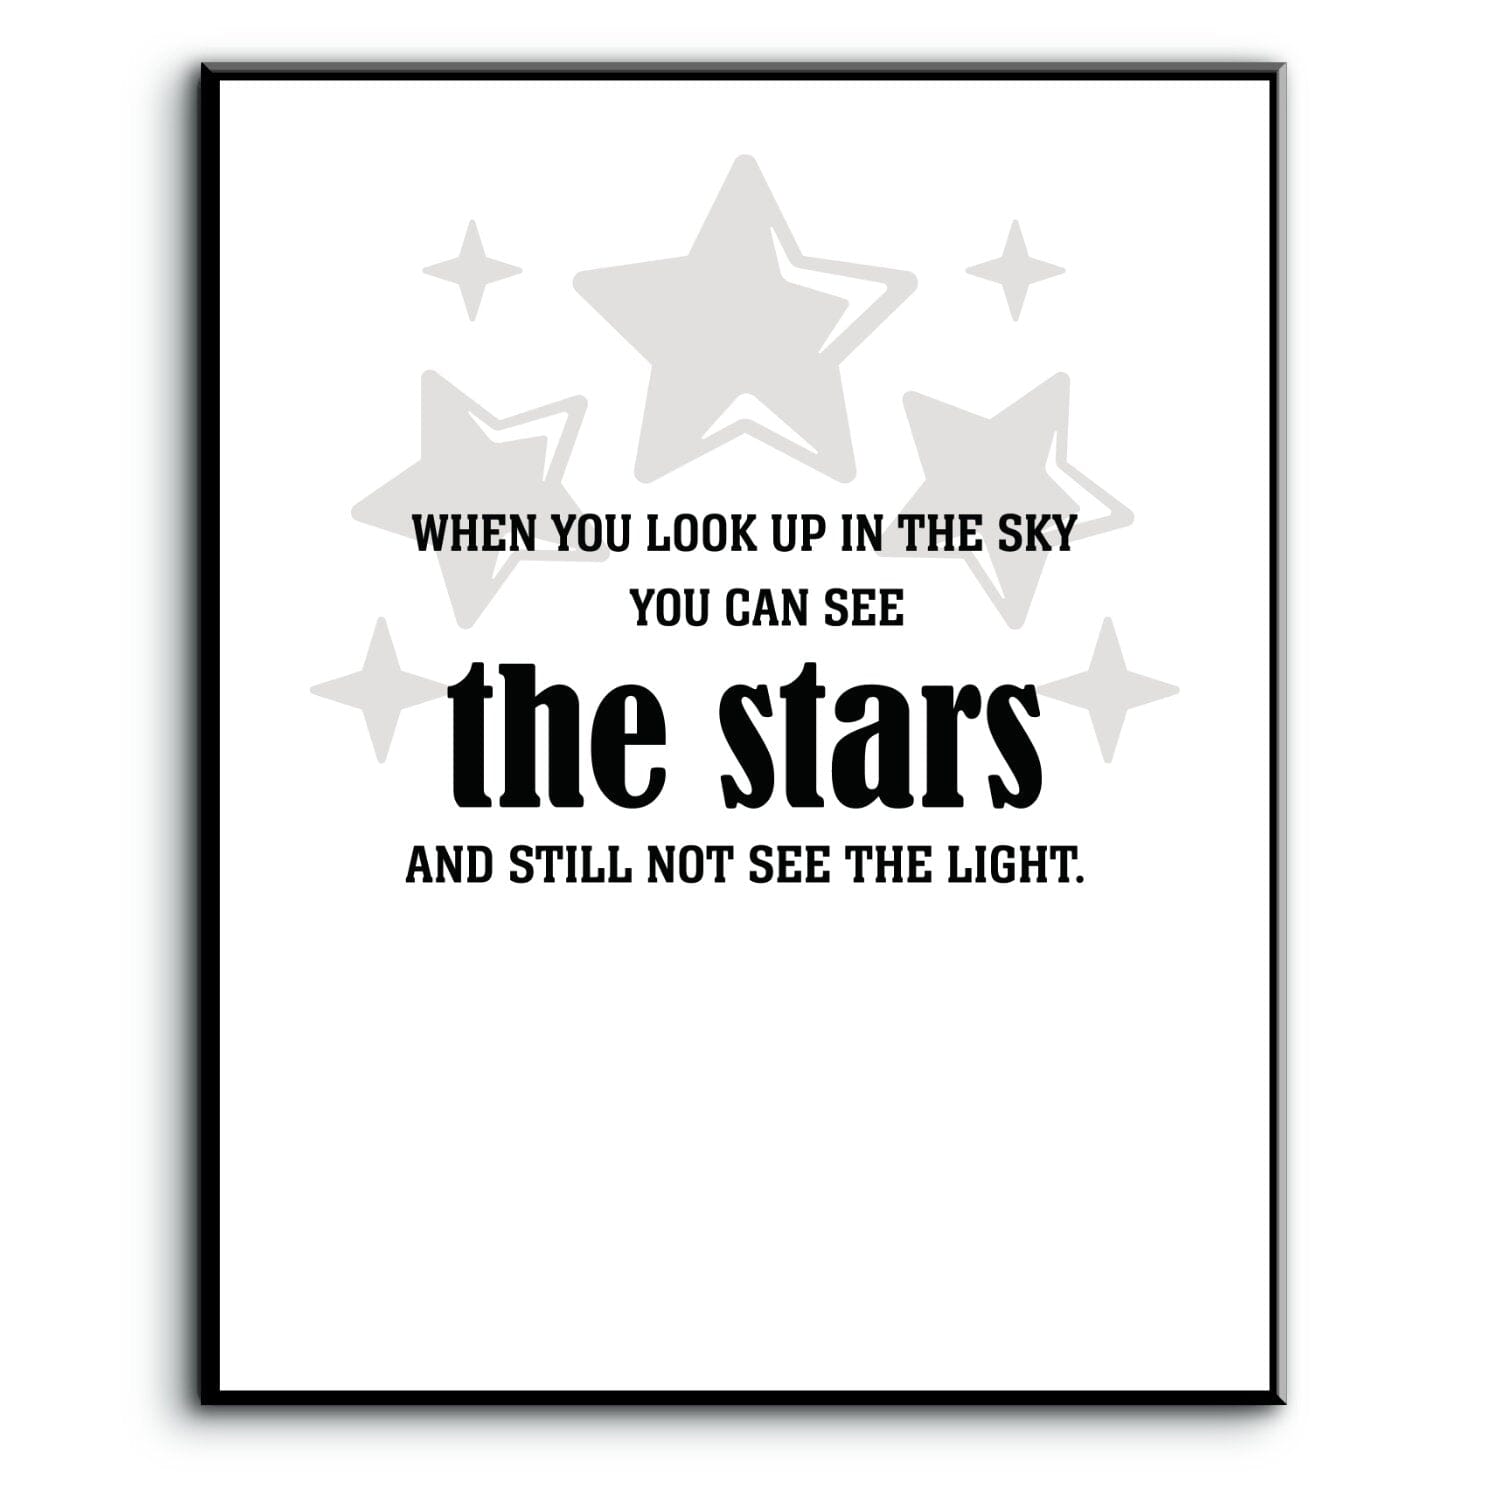 See the Stars and Still not see the Light - Wise and Witty Print Wise and Wiseass Quotes Song Lyrics Art 8x10 Plaque Mount 